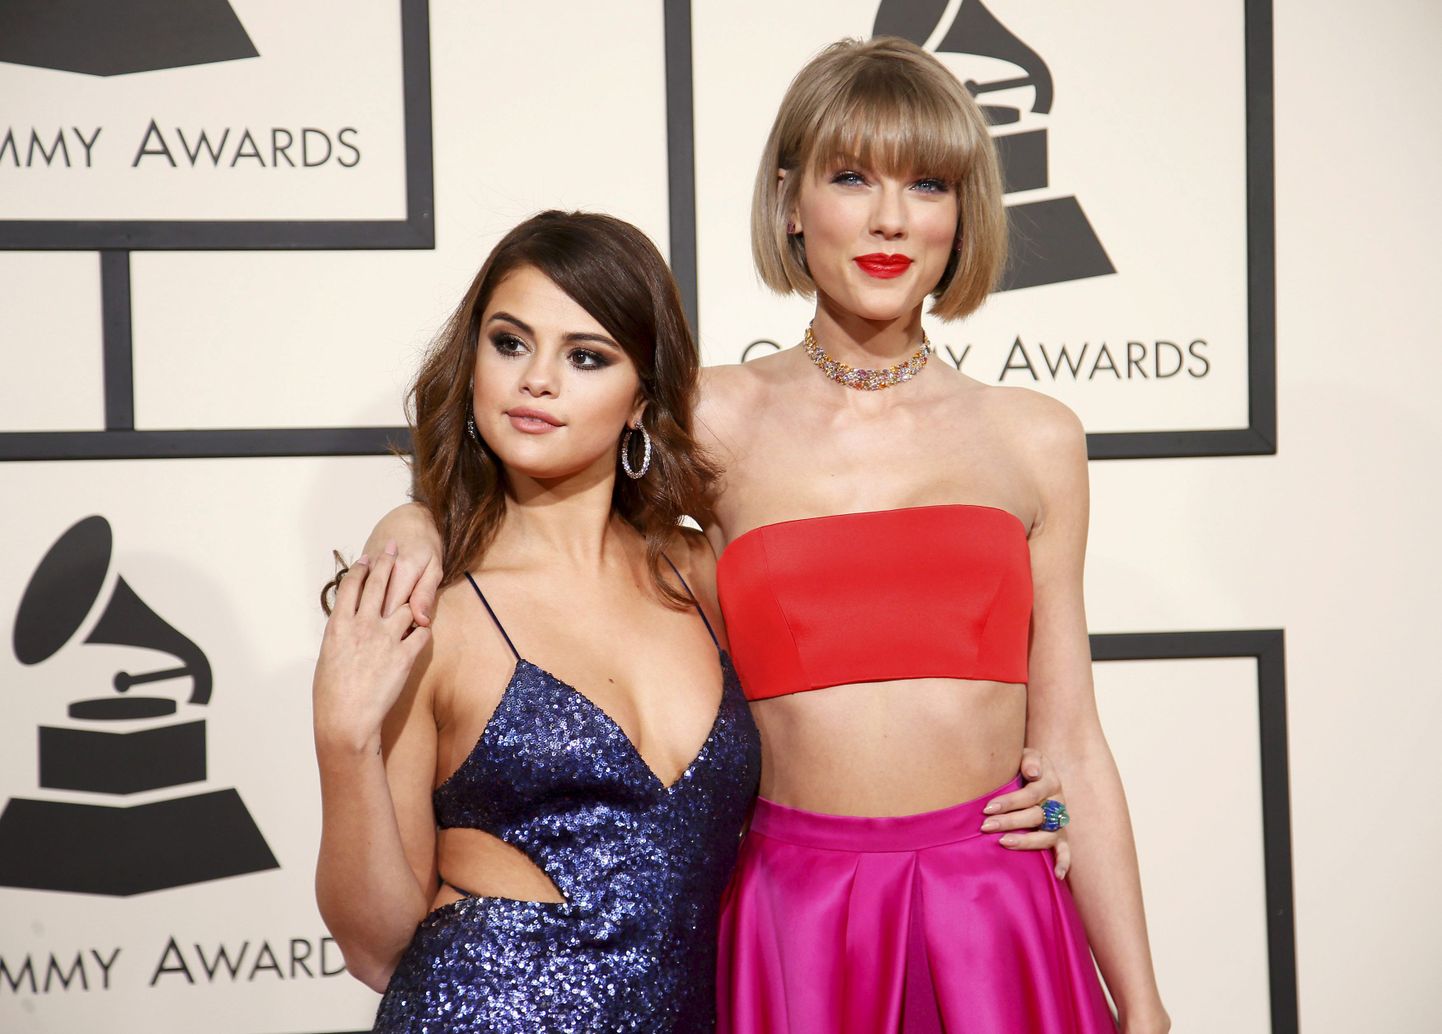 Singers Selena Gomez and Taylor Swift arrive at the 58th Grammy Awards in Los Angeles, California February 15, 2016.  REUTERS/Danny Moloshok      TPX IMAGES OF THE DAY